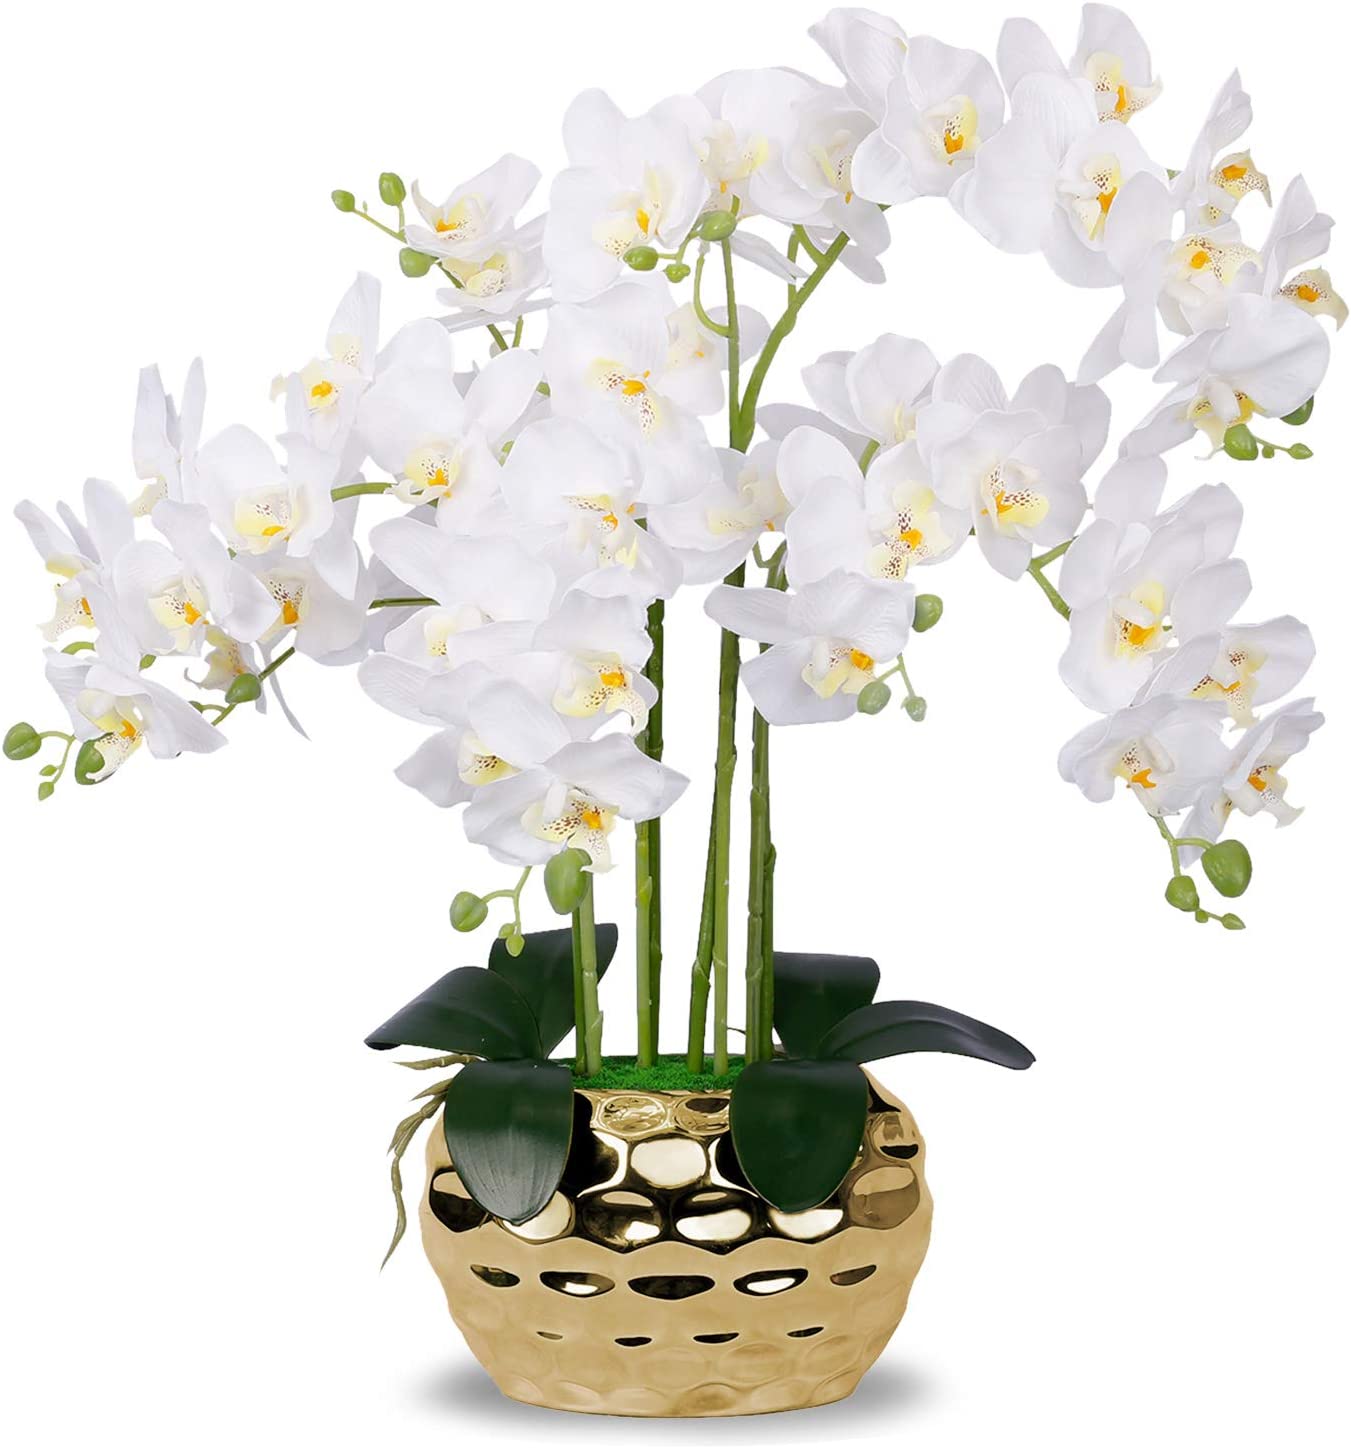 Do orchids come back each year?